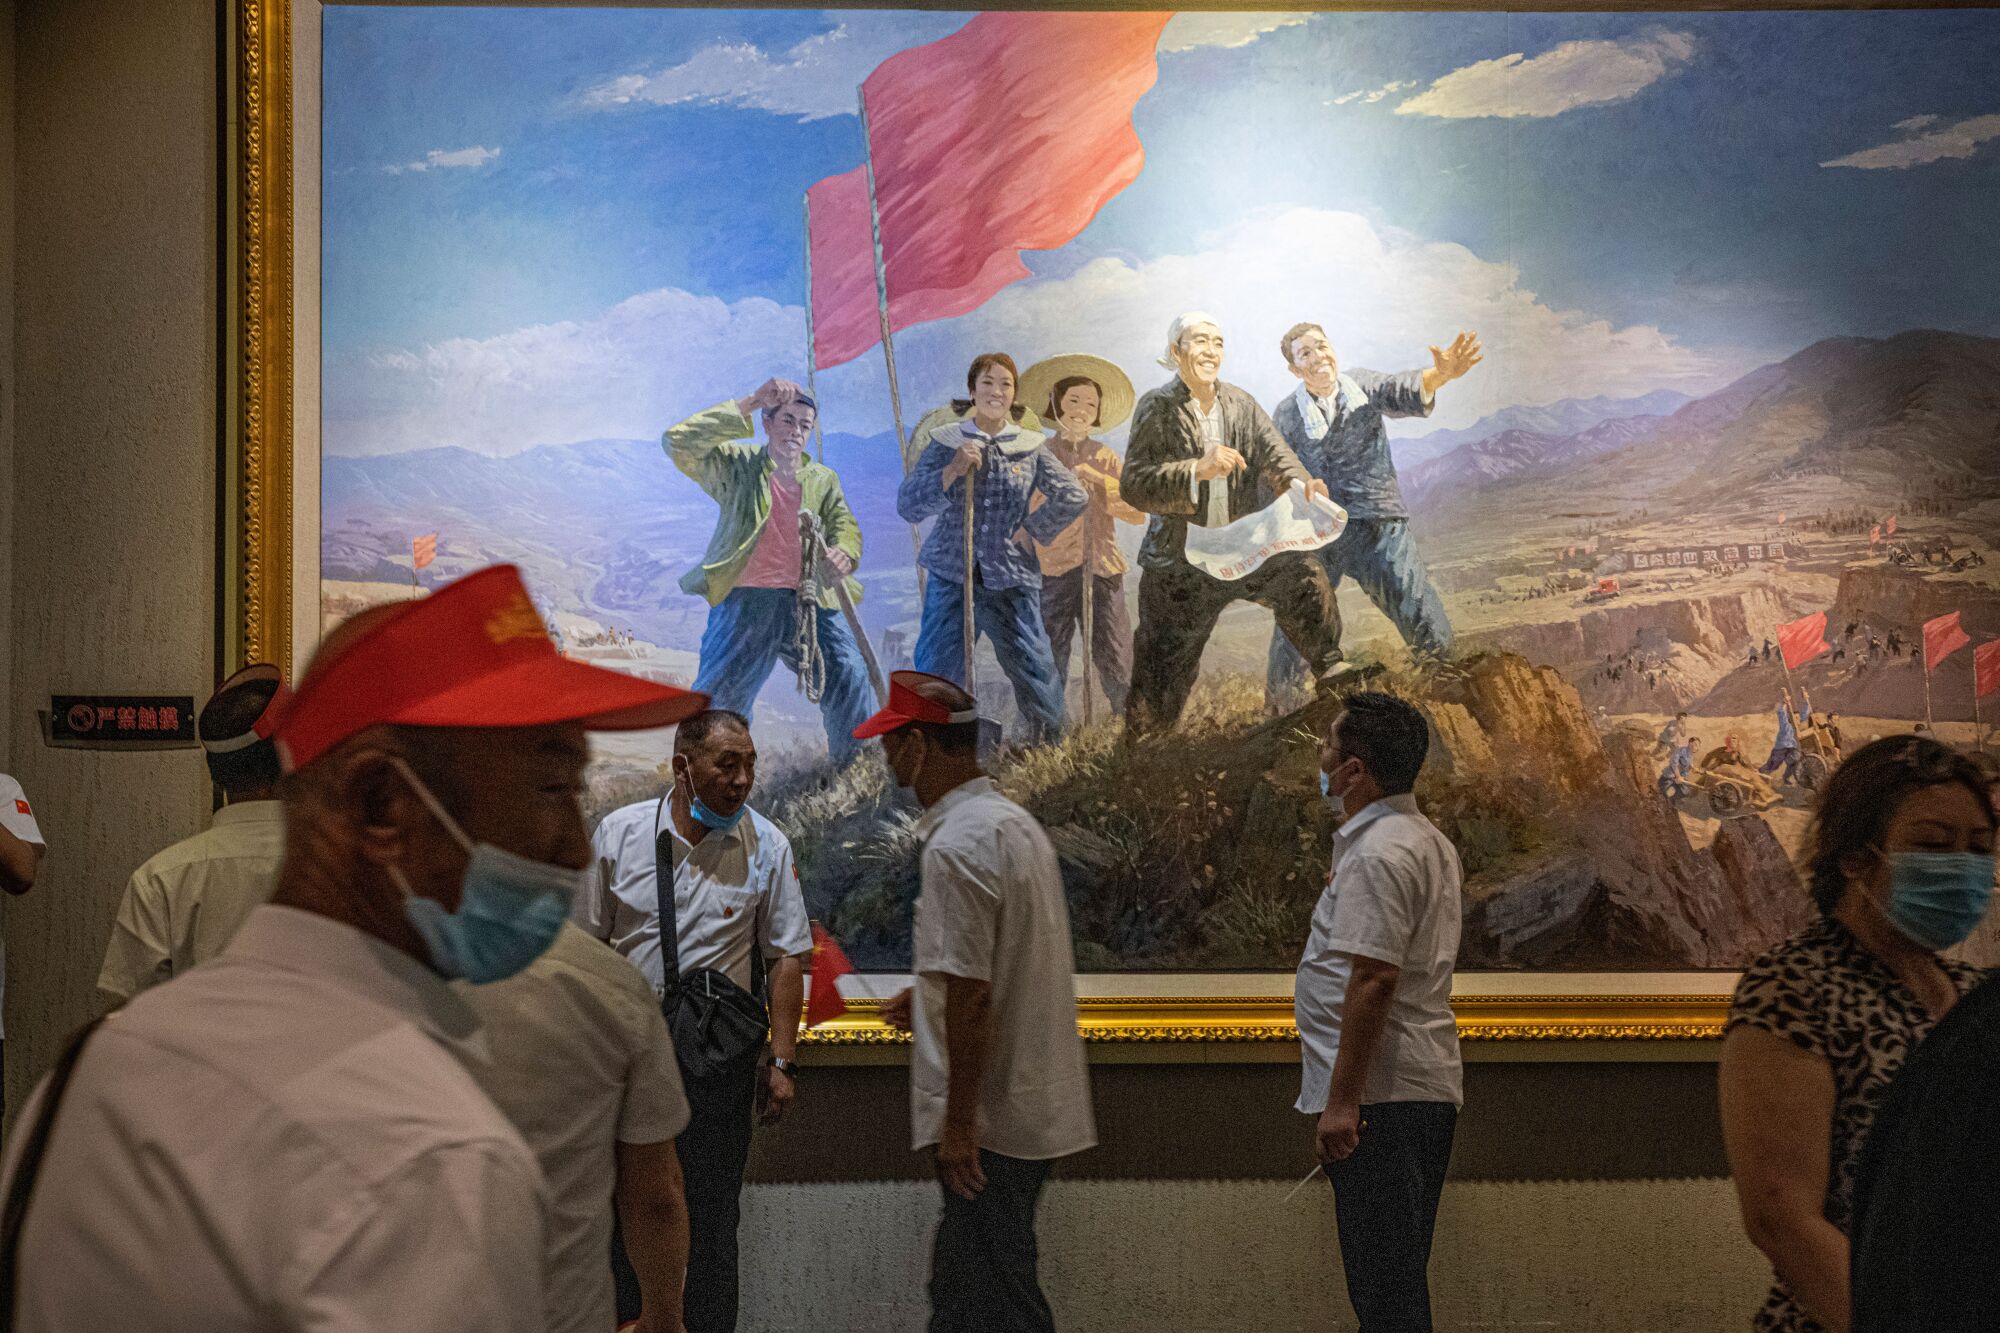 People stand before a large revolutionary-style painting depicting five people in a mountainous landscape and red flags